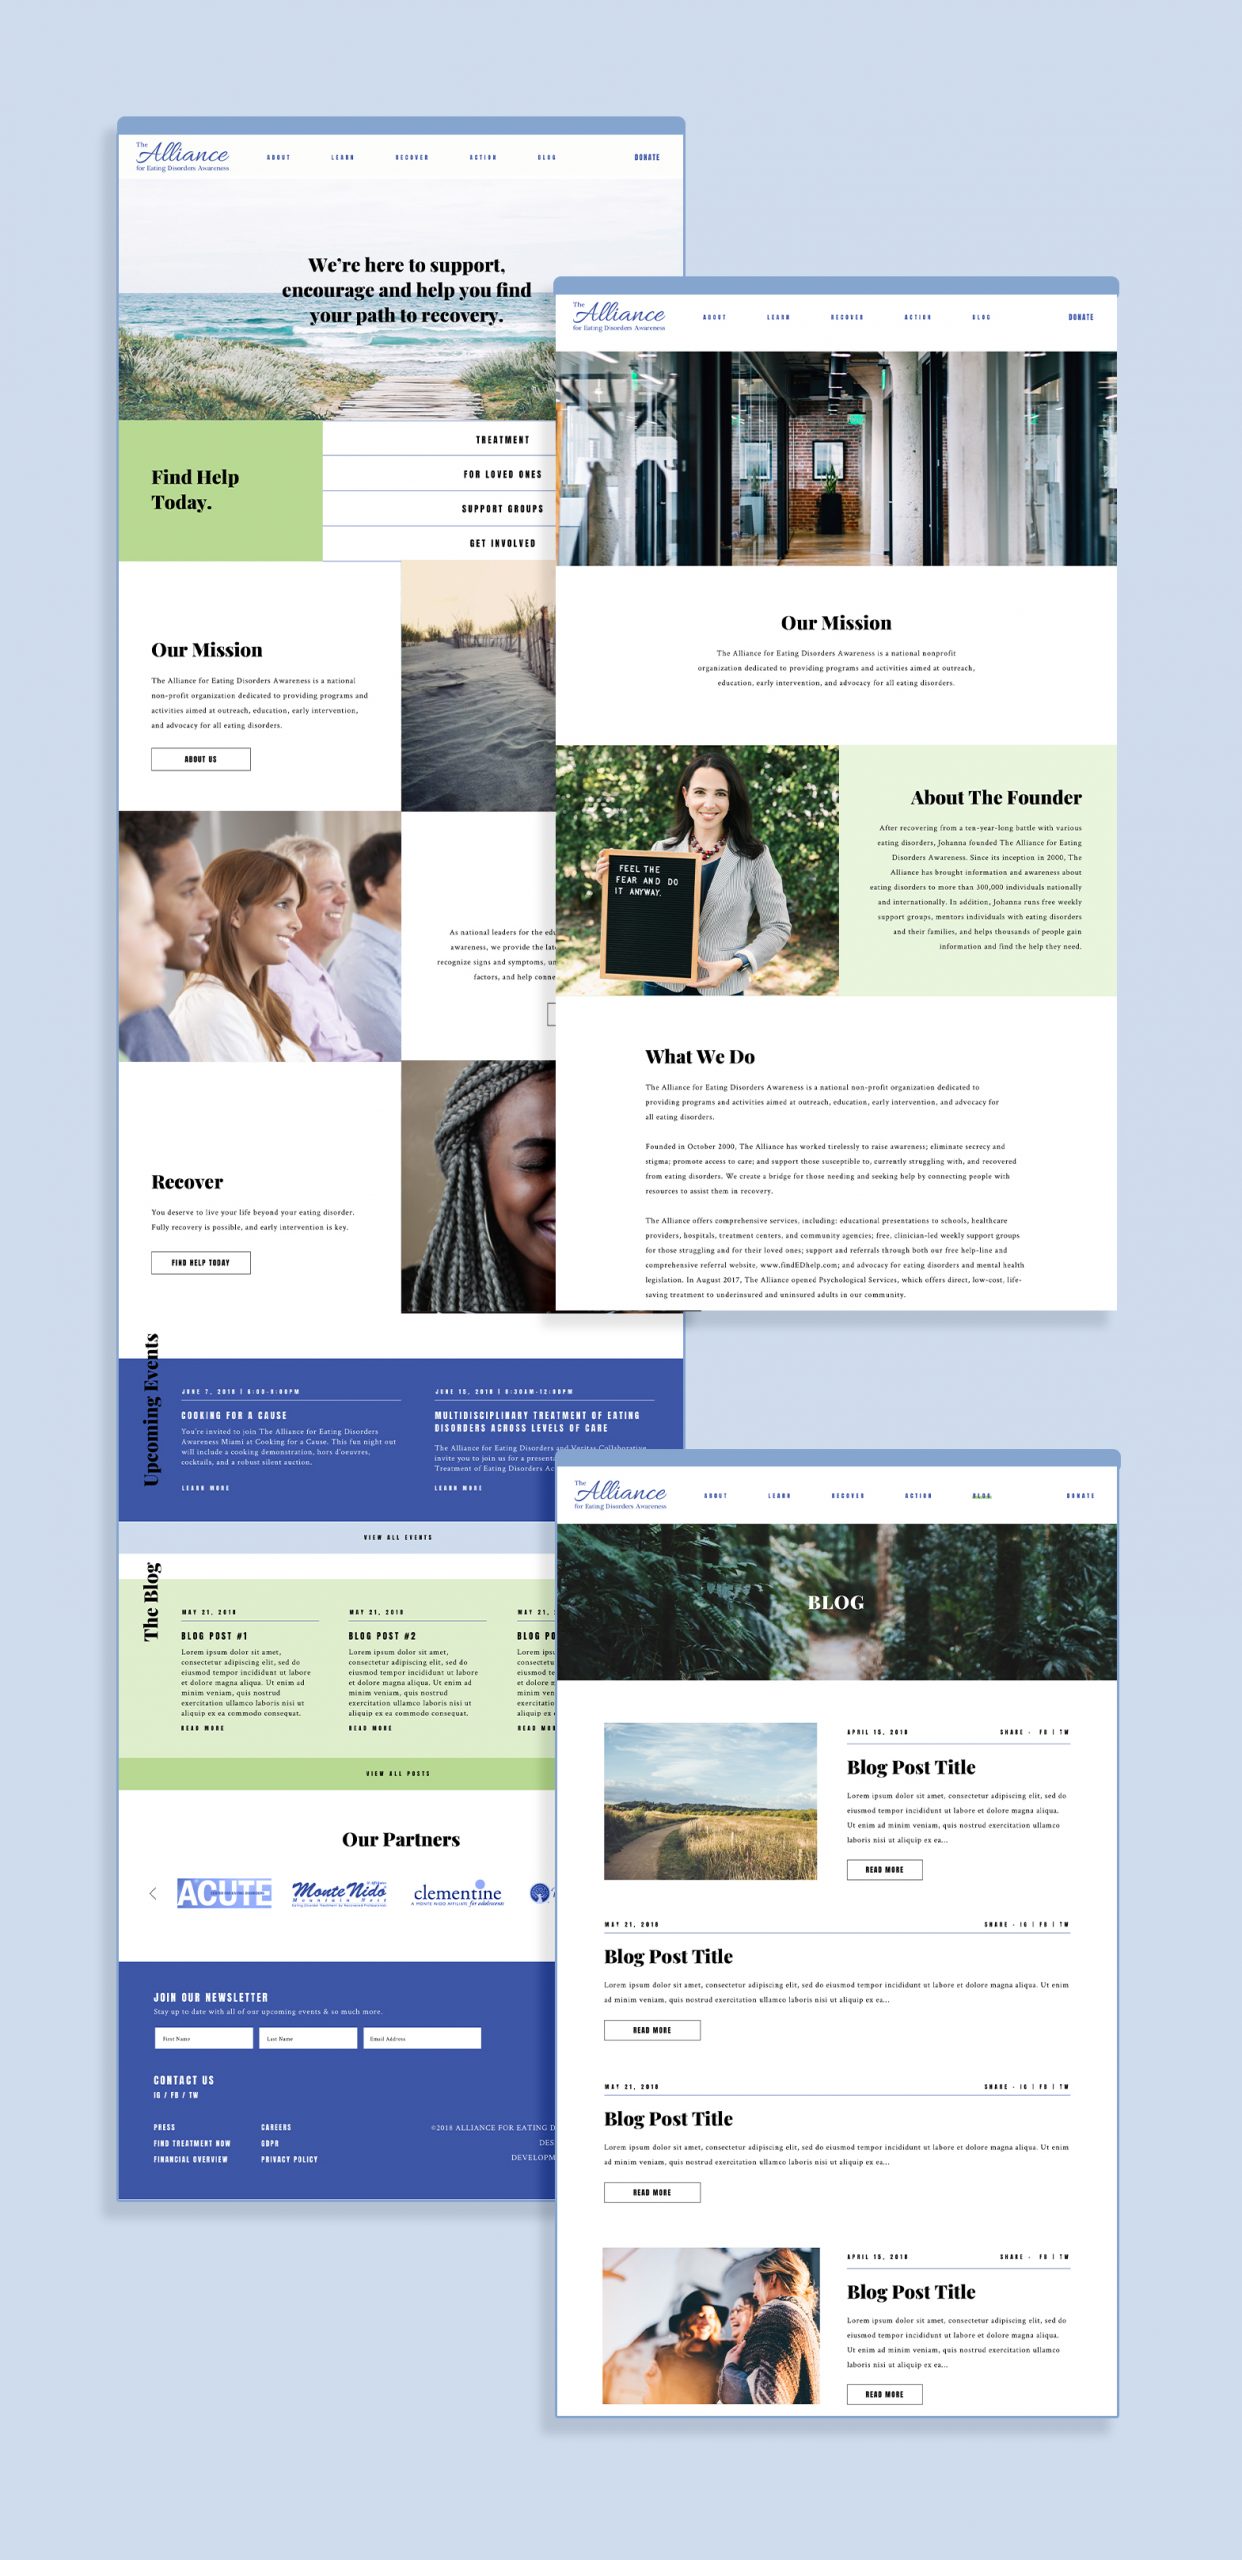 Desktop website mockups for The Alliance for Eating Disorders Awareness. The mockups show the homepage, about, and blog pages, on a soft blue background.